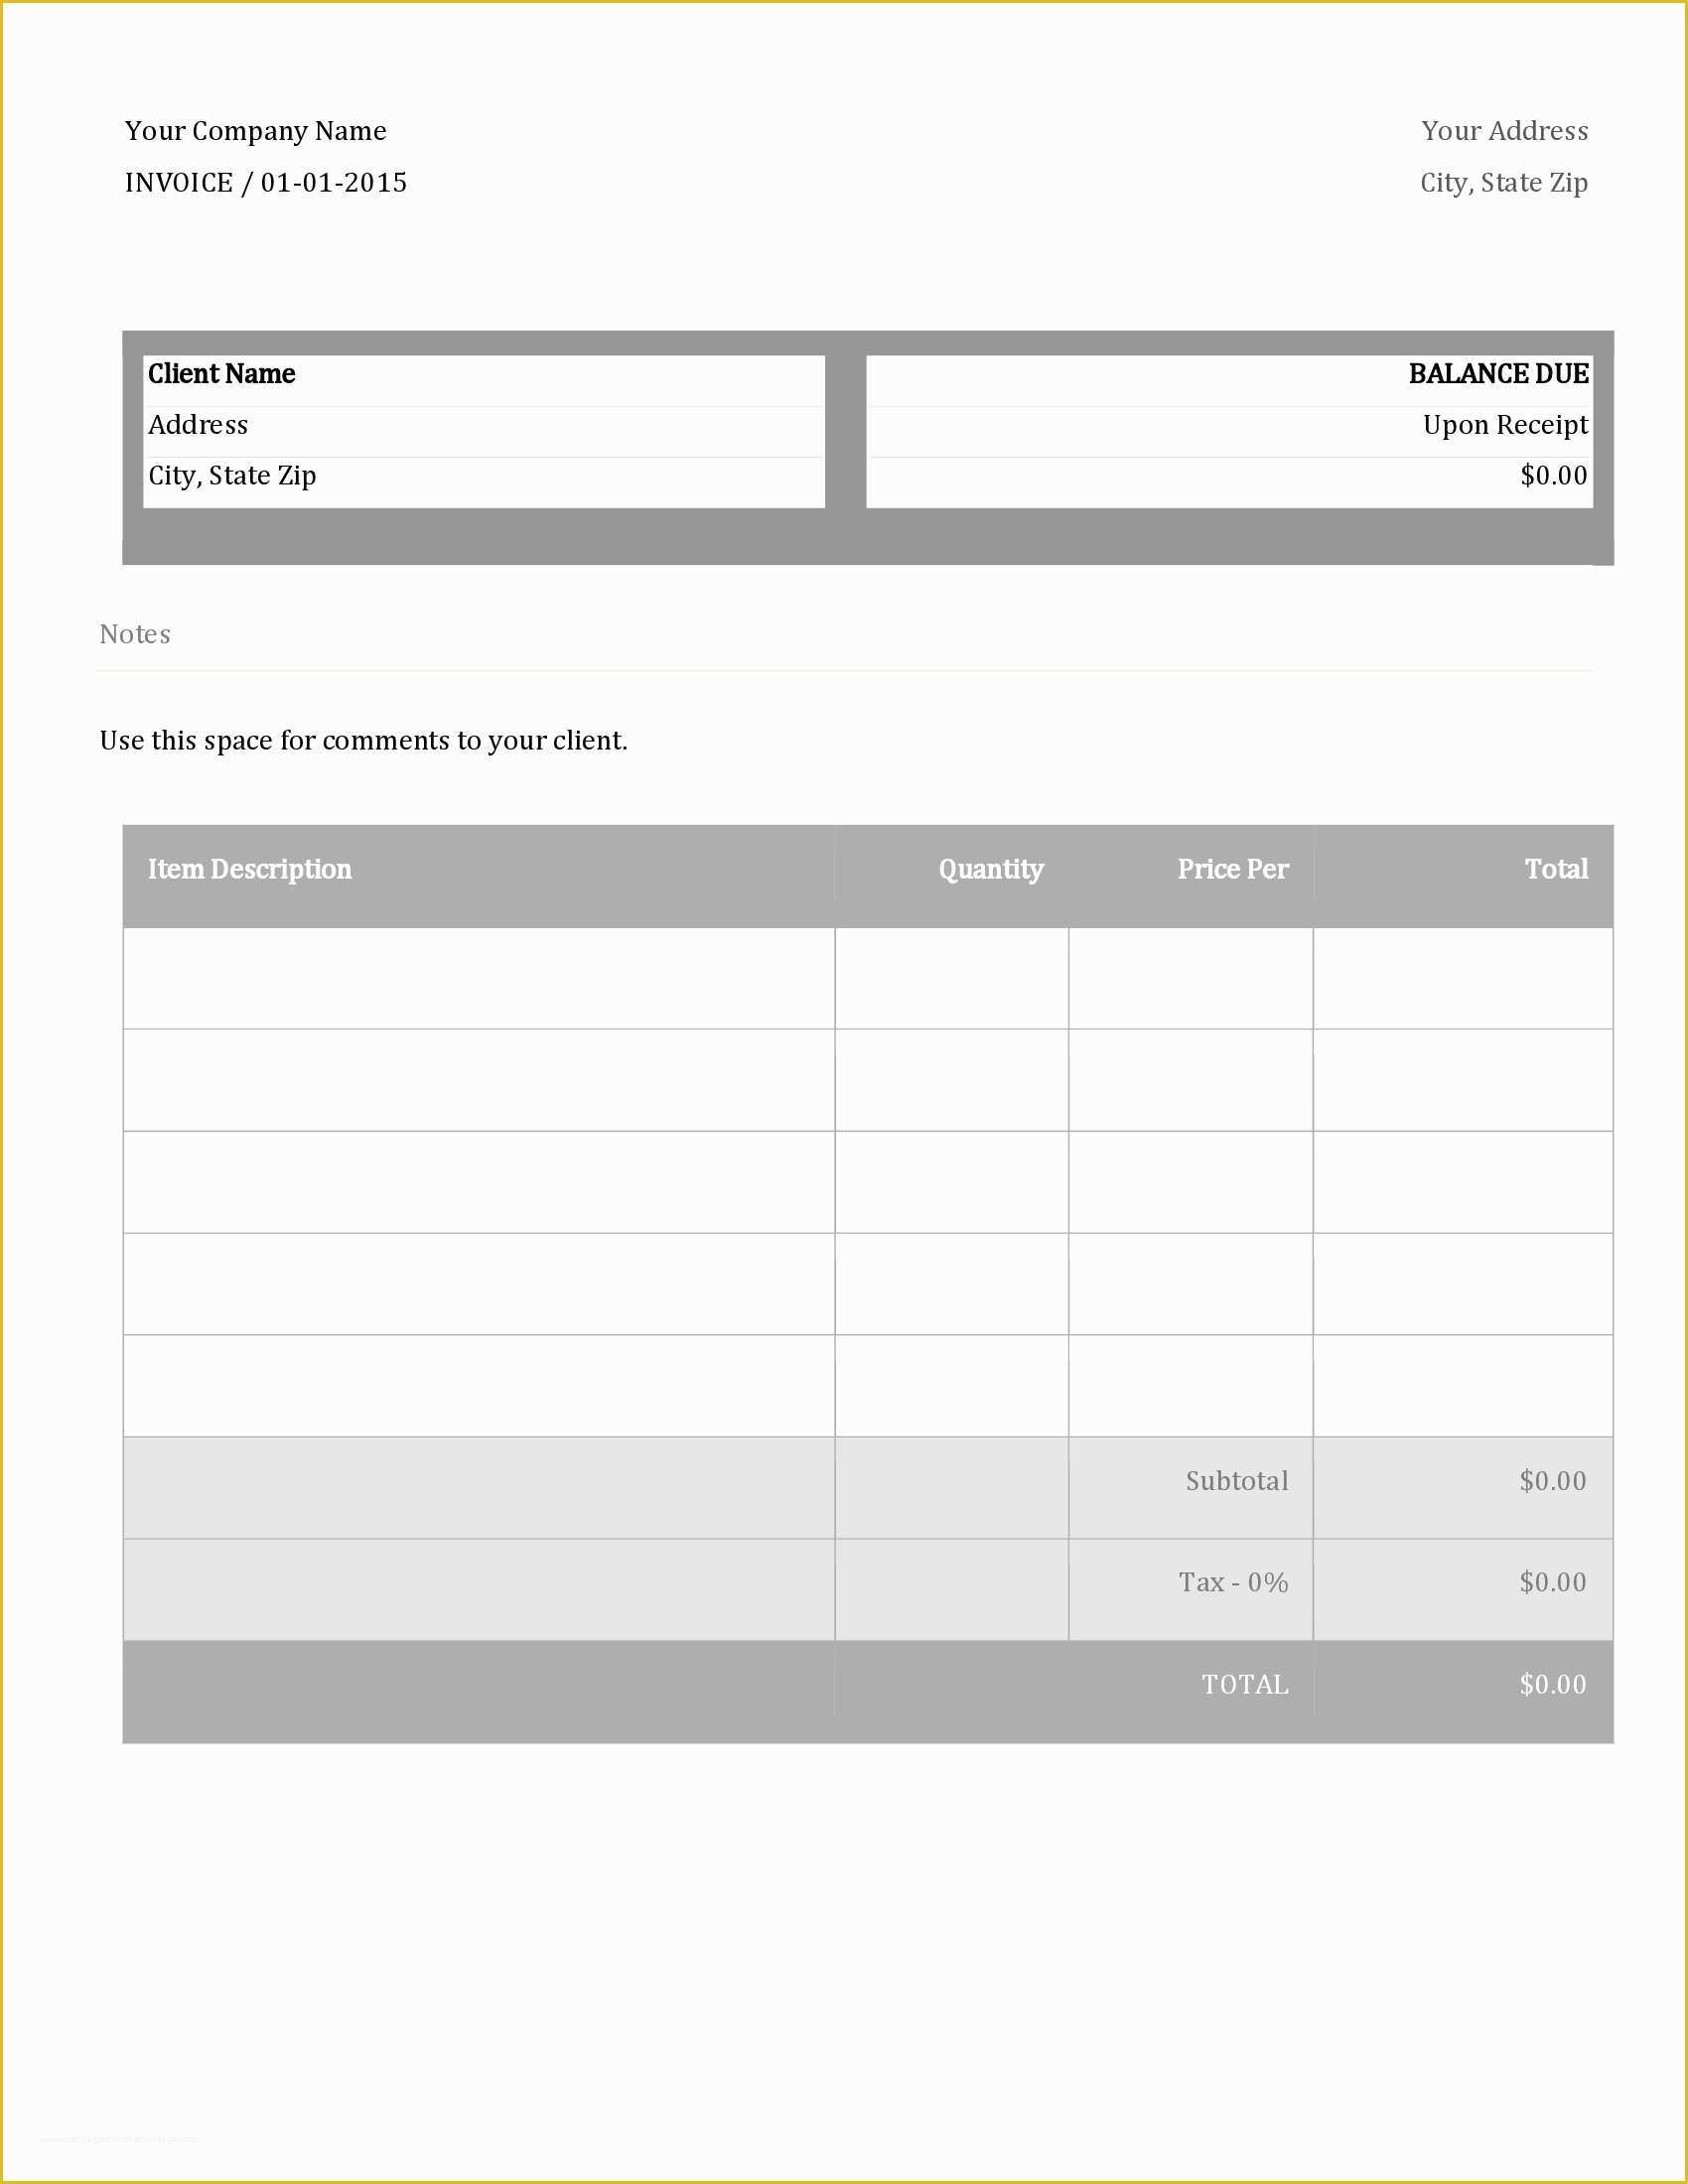 44 HTML Invoice Template Free Download Heritagechristiancollege